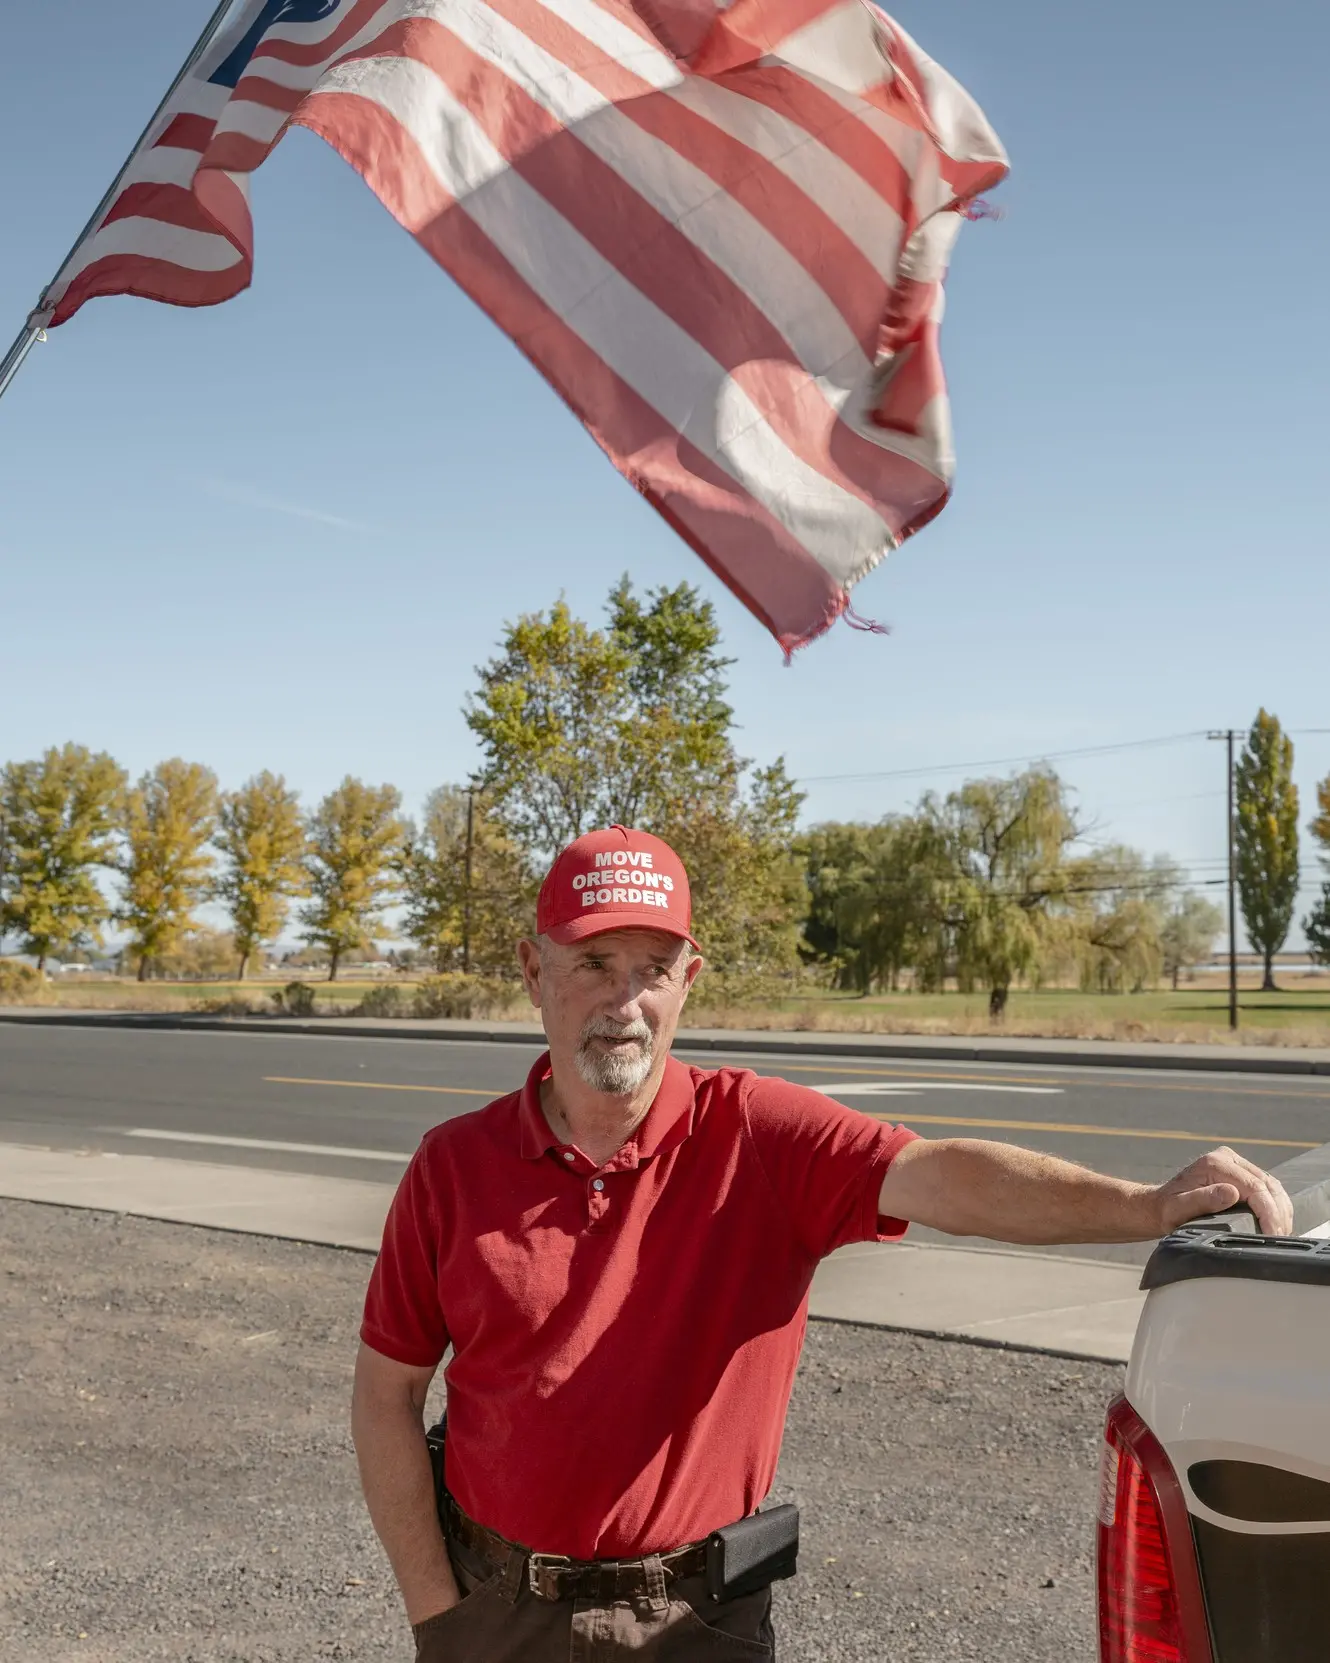 Man stands in front of truck and American flag wearing a red hat that says "Move Oregon's Border"